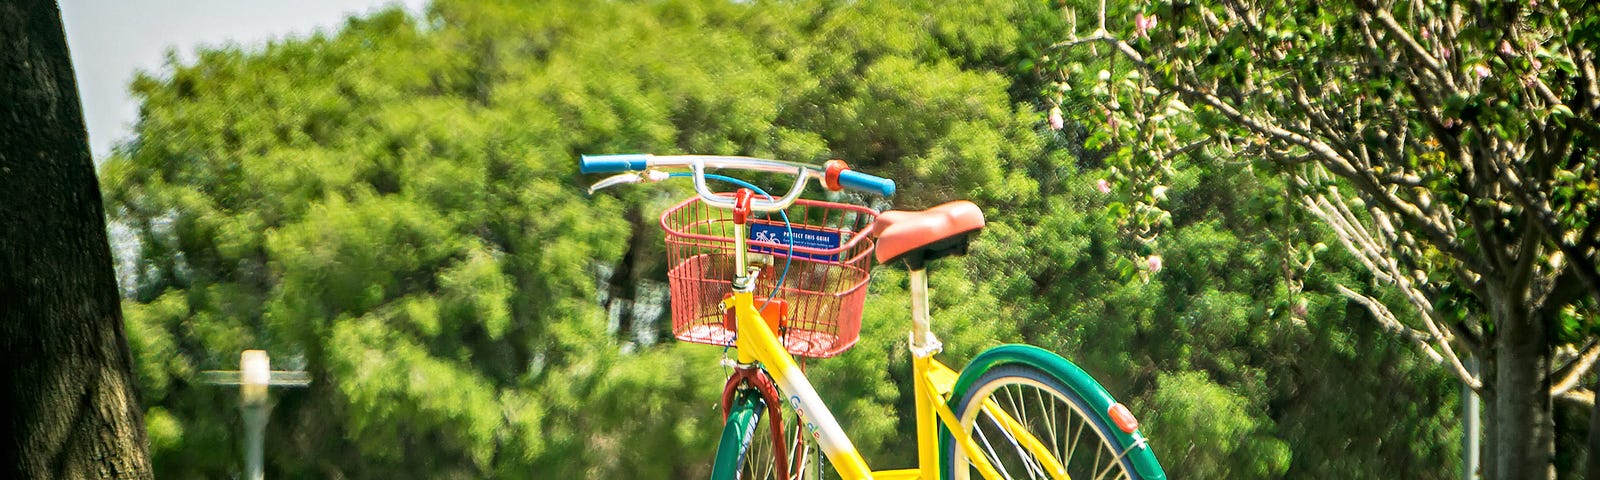 A photo of a Google bike parked on a grassy lawn.